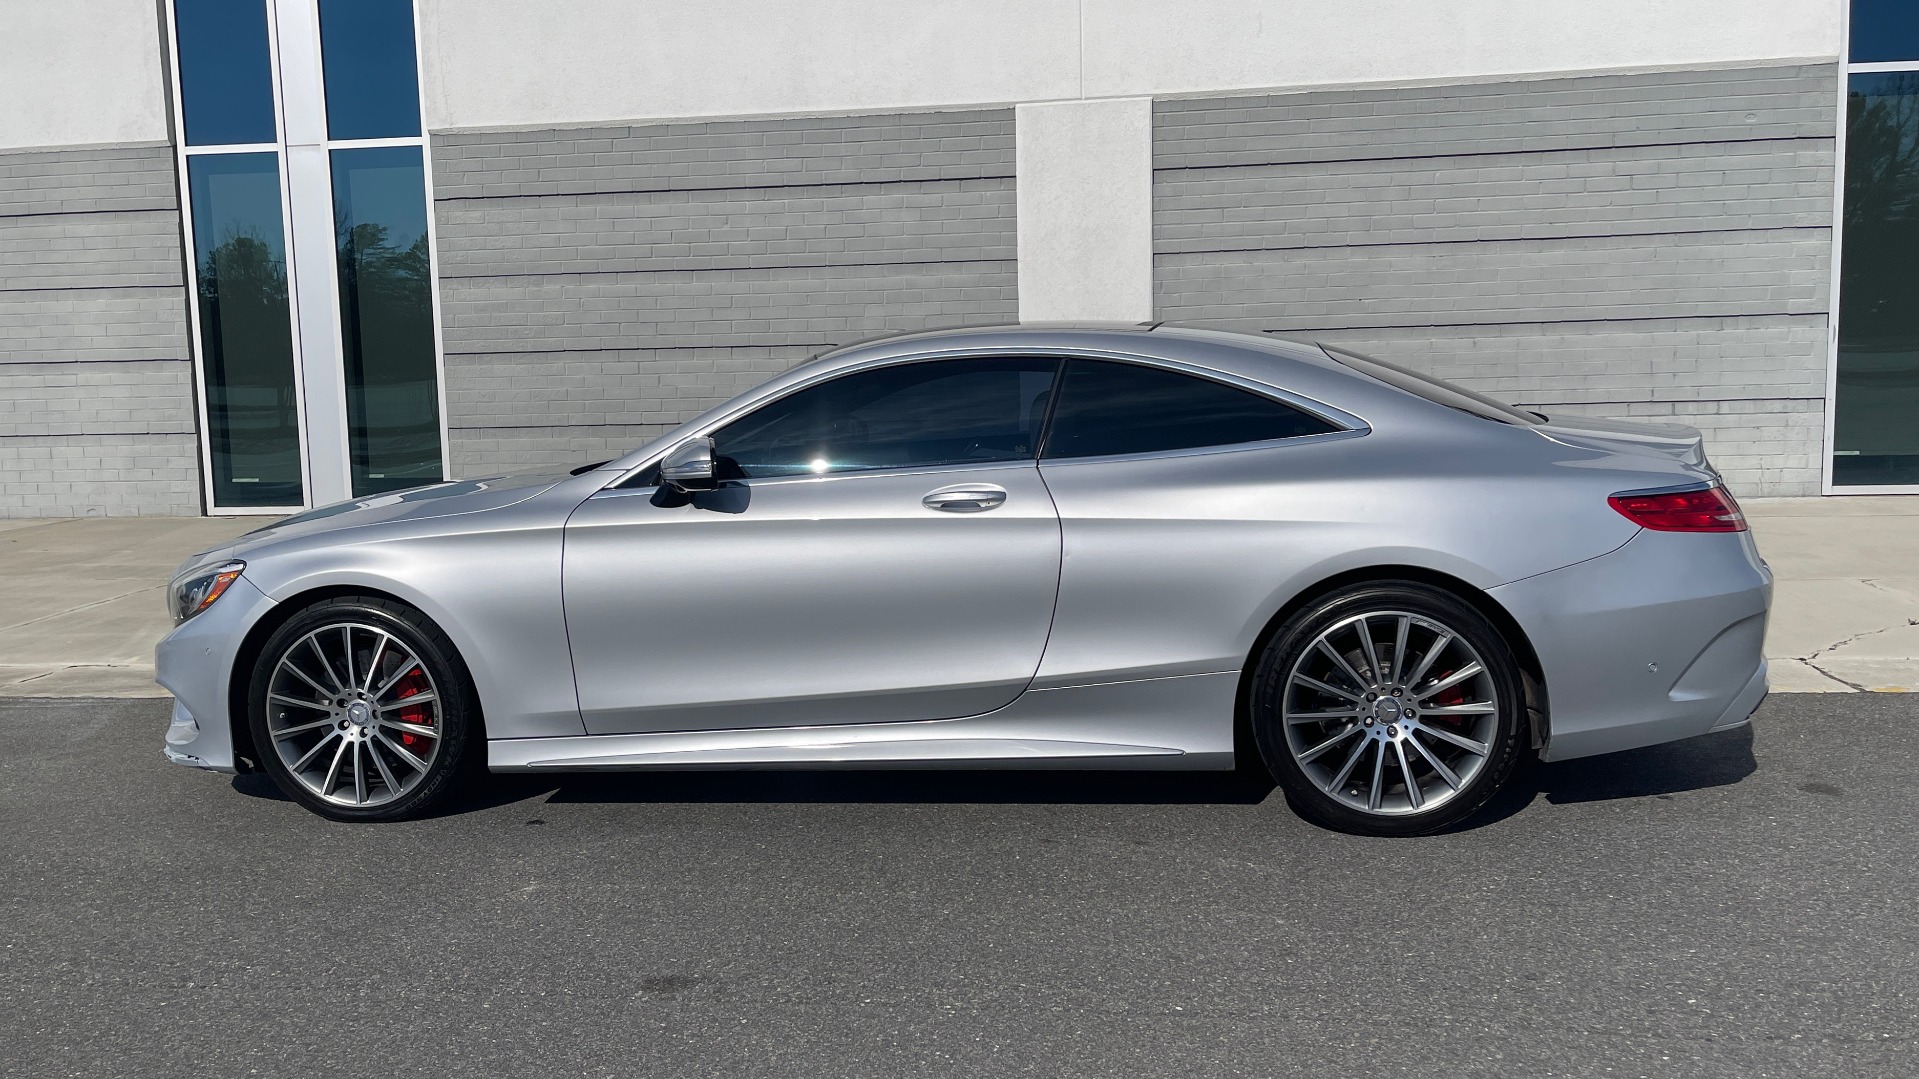 Used 2016 Mercedes-Benz S-CLASS S 550 4MATIC COUPE PREMIUM / SPORT / NAV / SUNROOF / REARVIEW for sale Sold at Formula Imports in Charlotte NC 28227 3